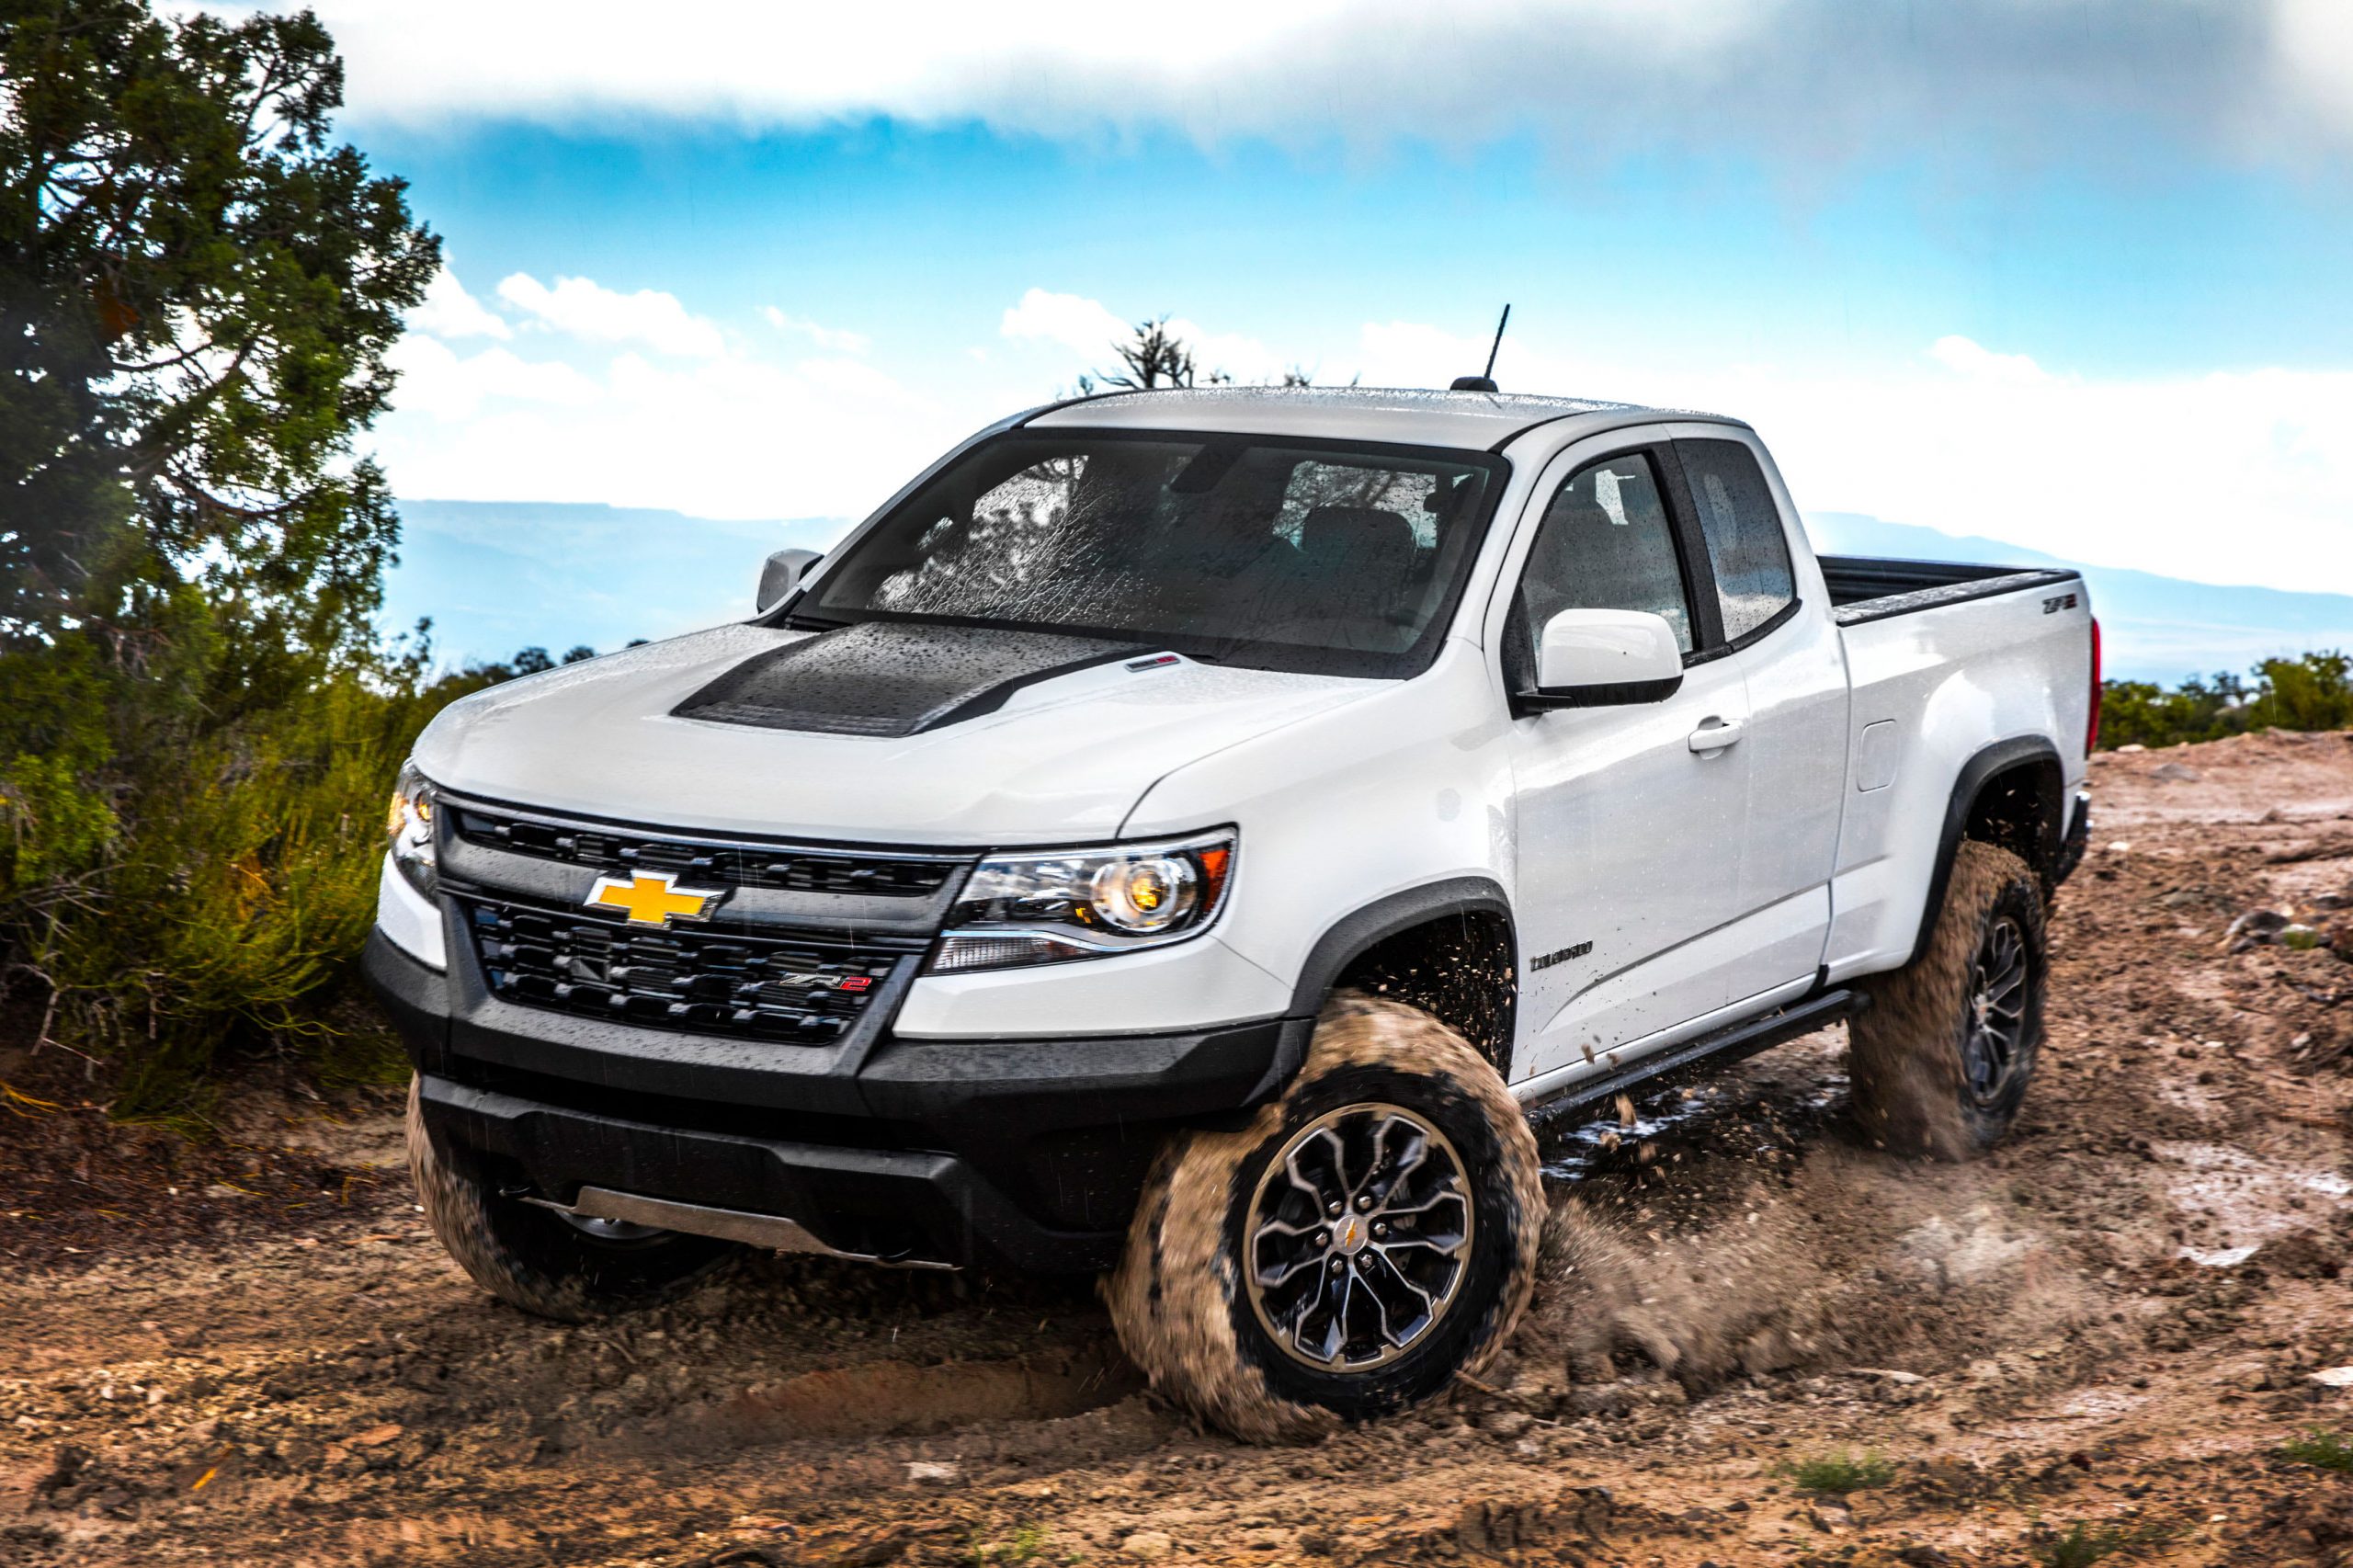 GM is investing $1.5 billion in US to construct redesigned midsize pickups